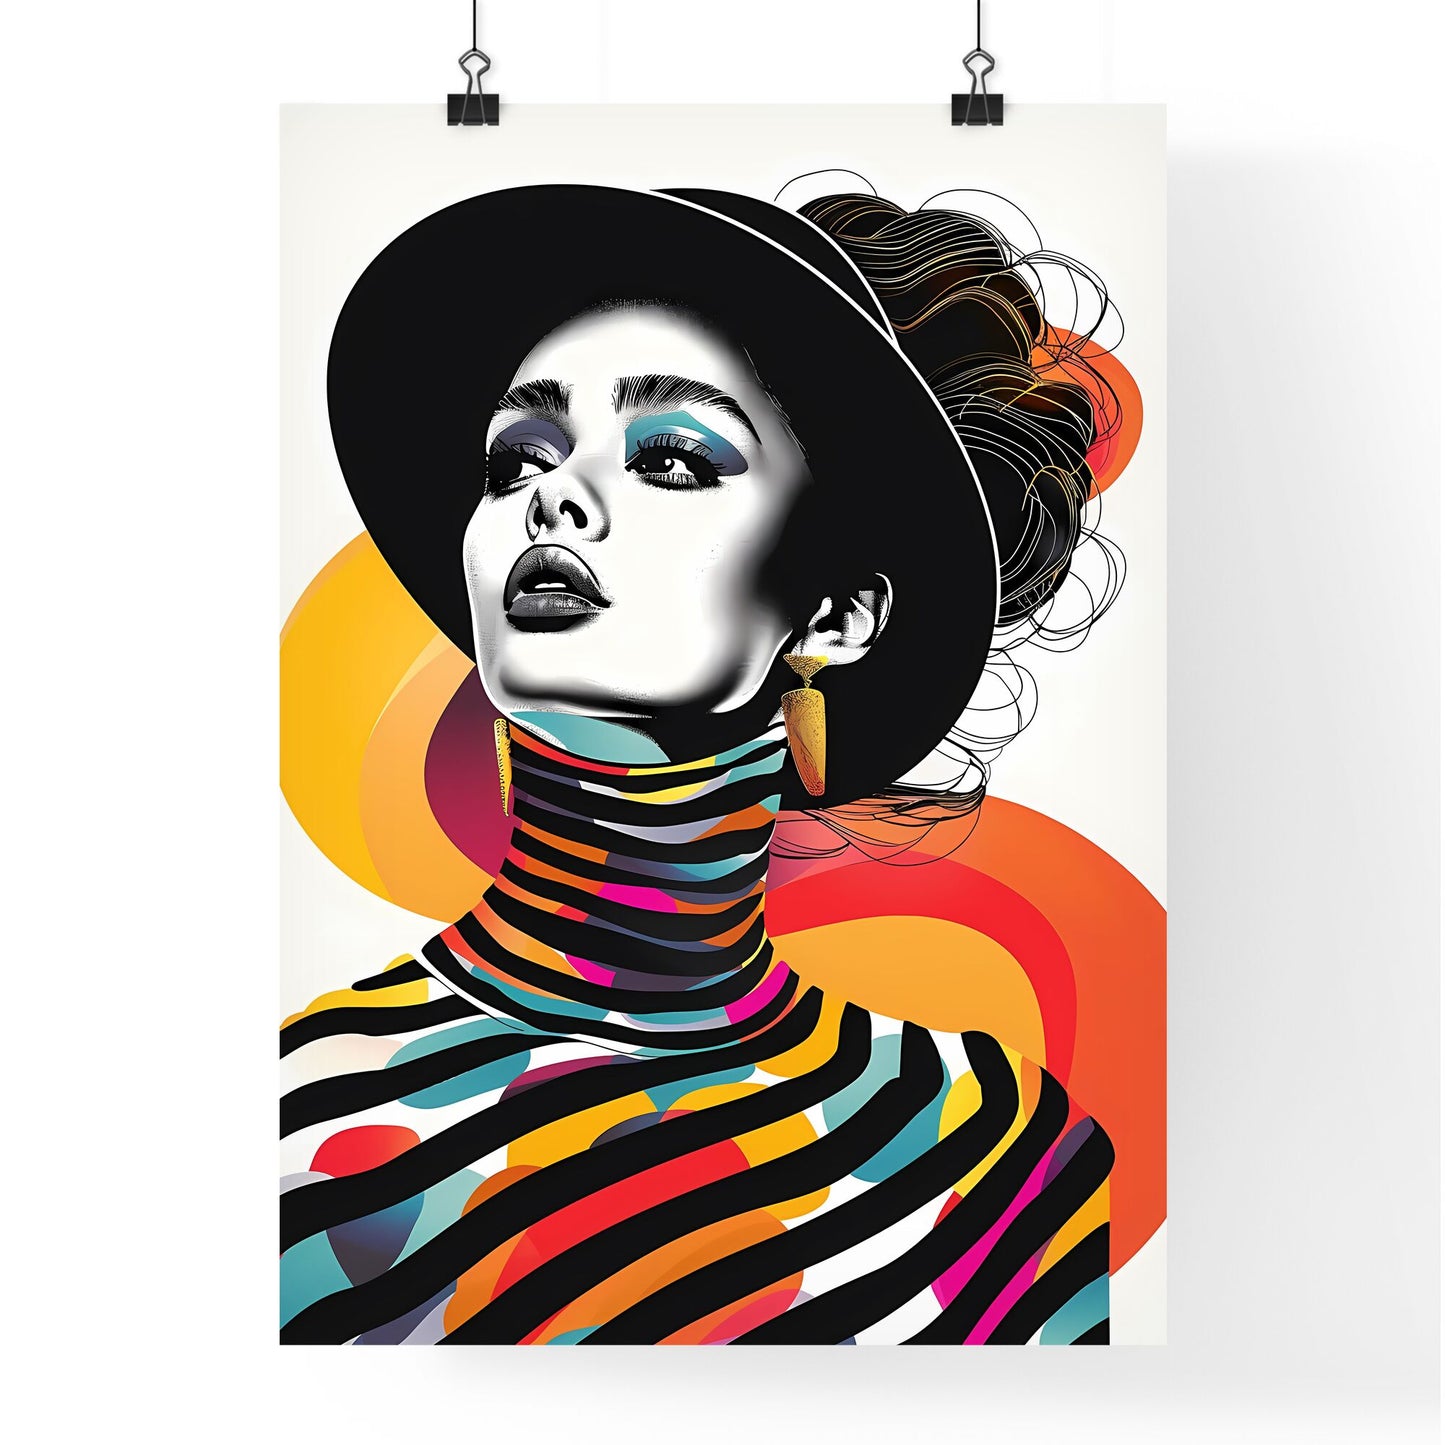 Black and white illustration of a stylish, expressive woman with zebra patterns, showcasing minimalism and art Default Title